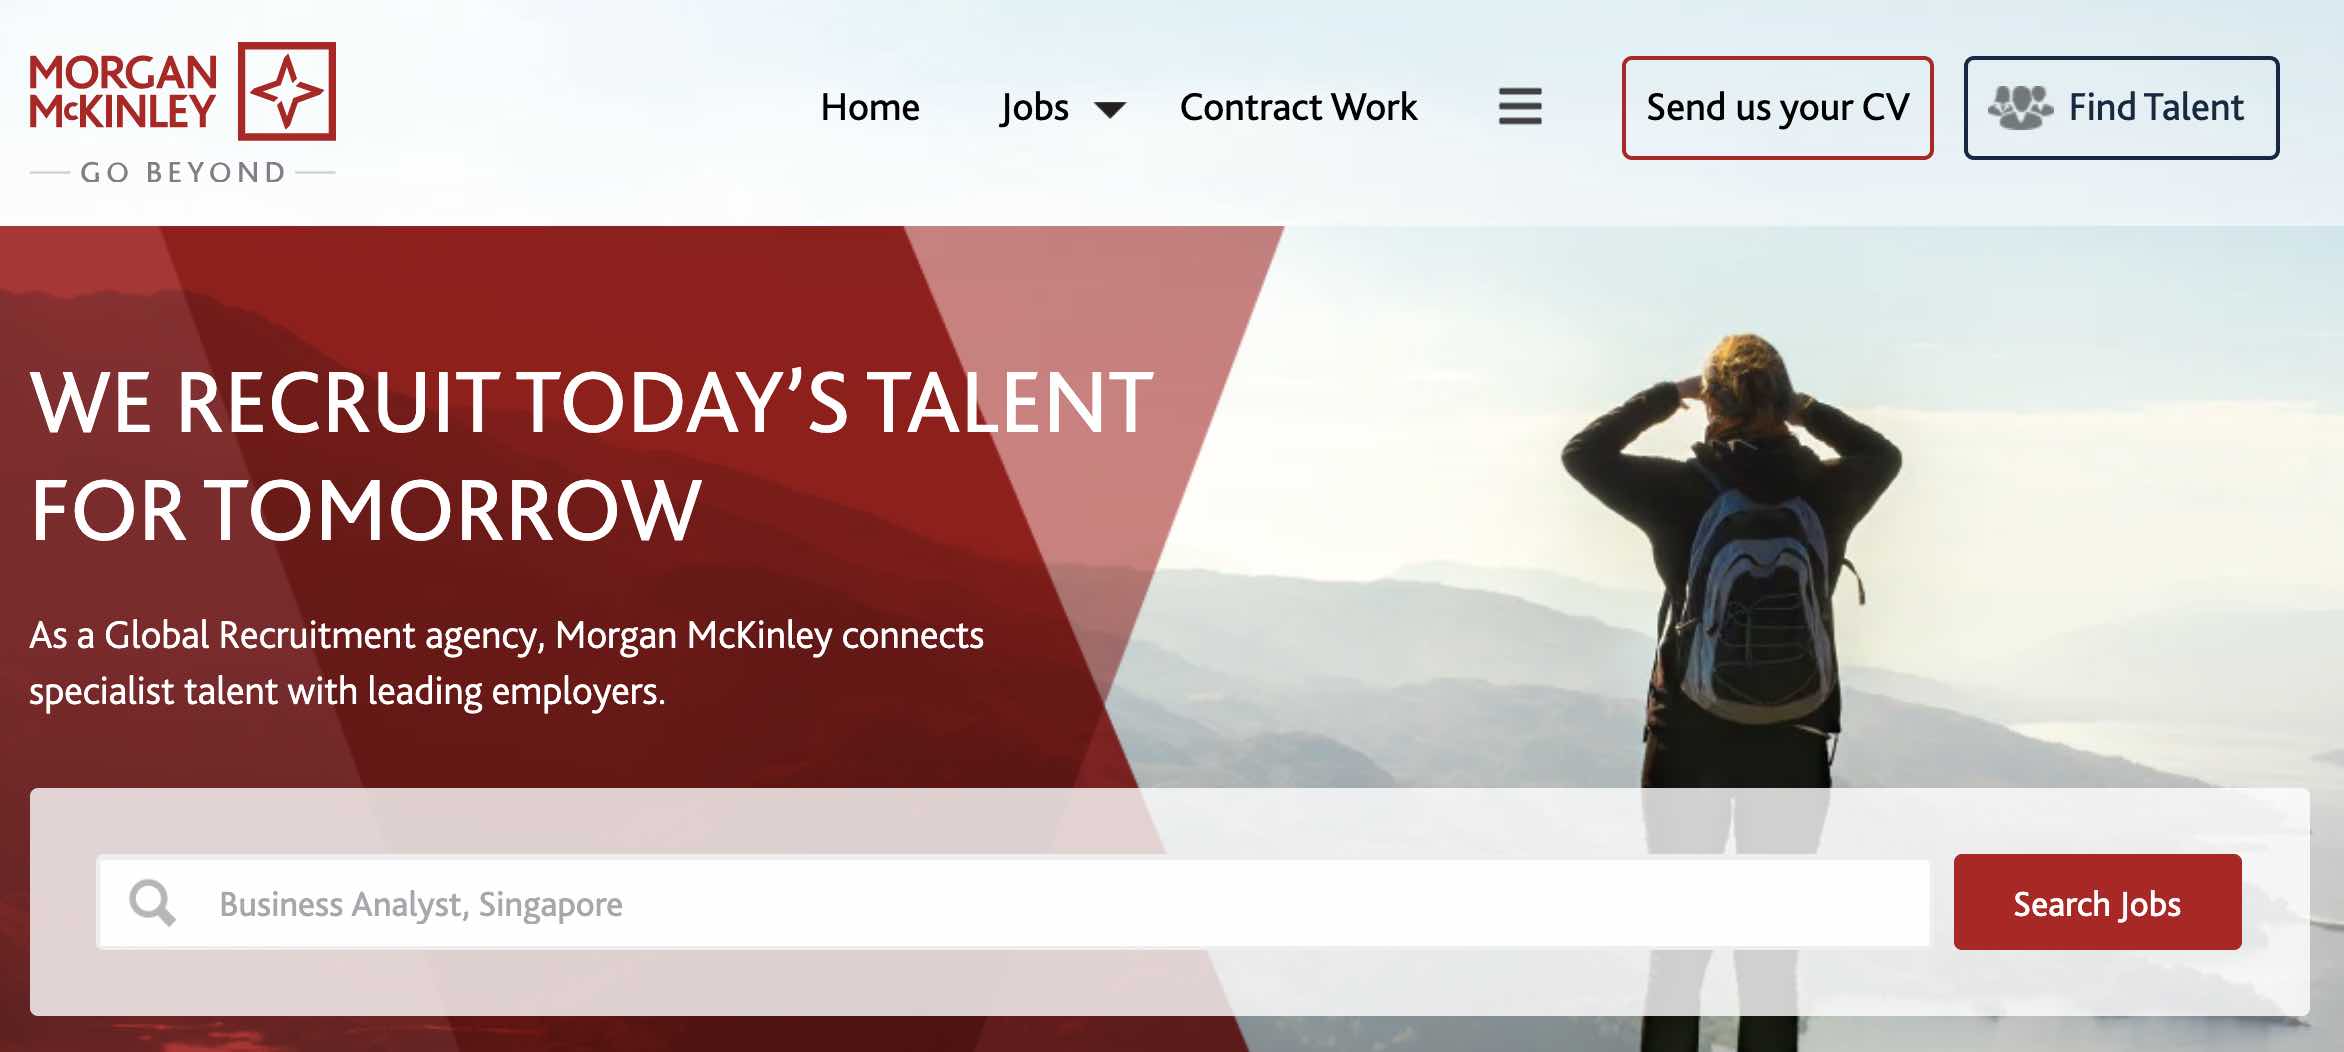 Morgan McKinley Singapore - Recruitment agency and executive search firm